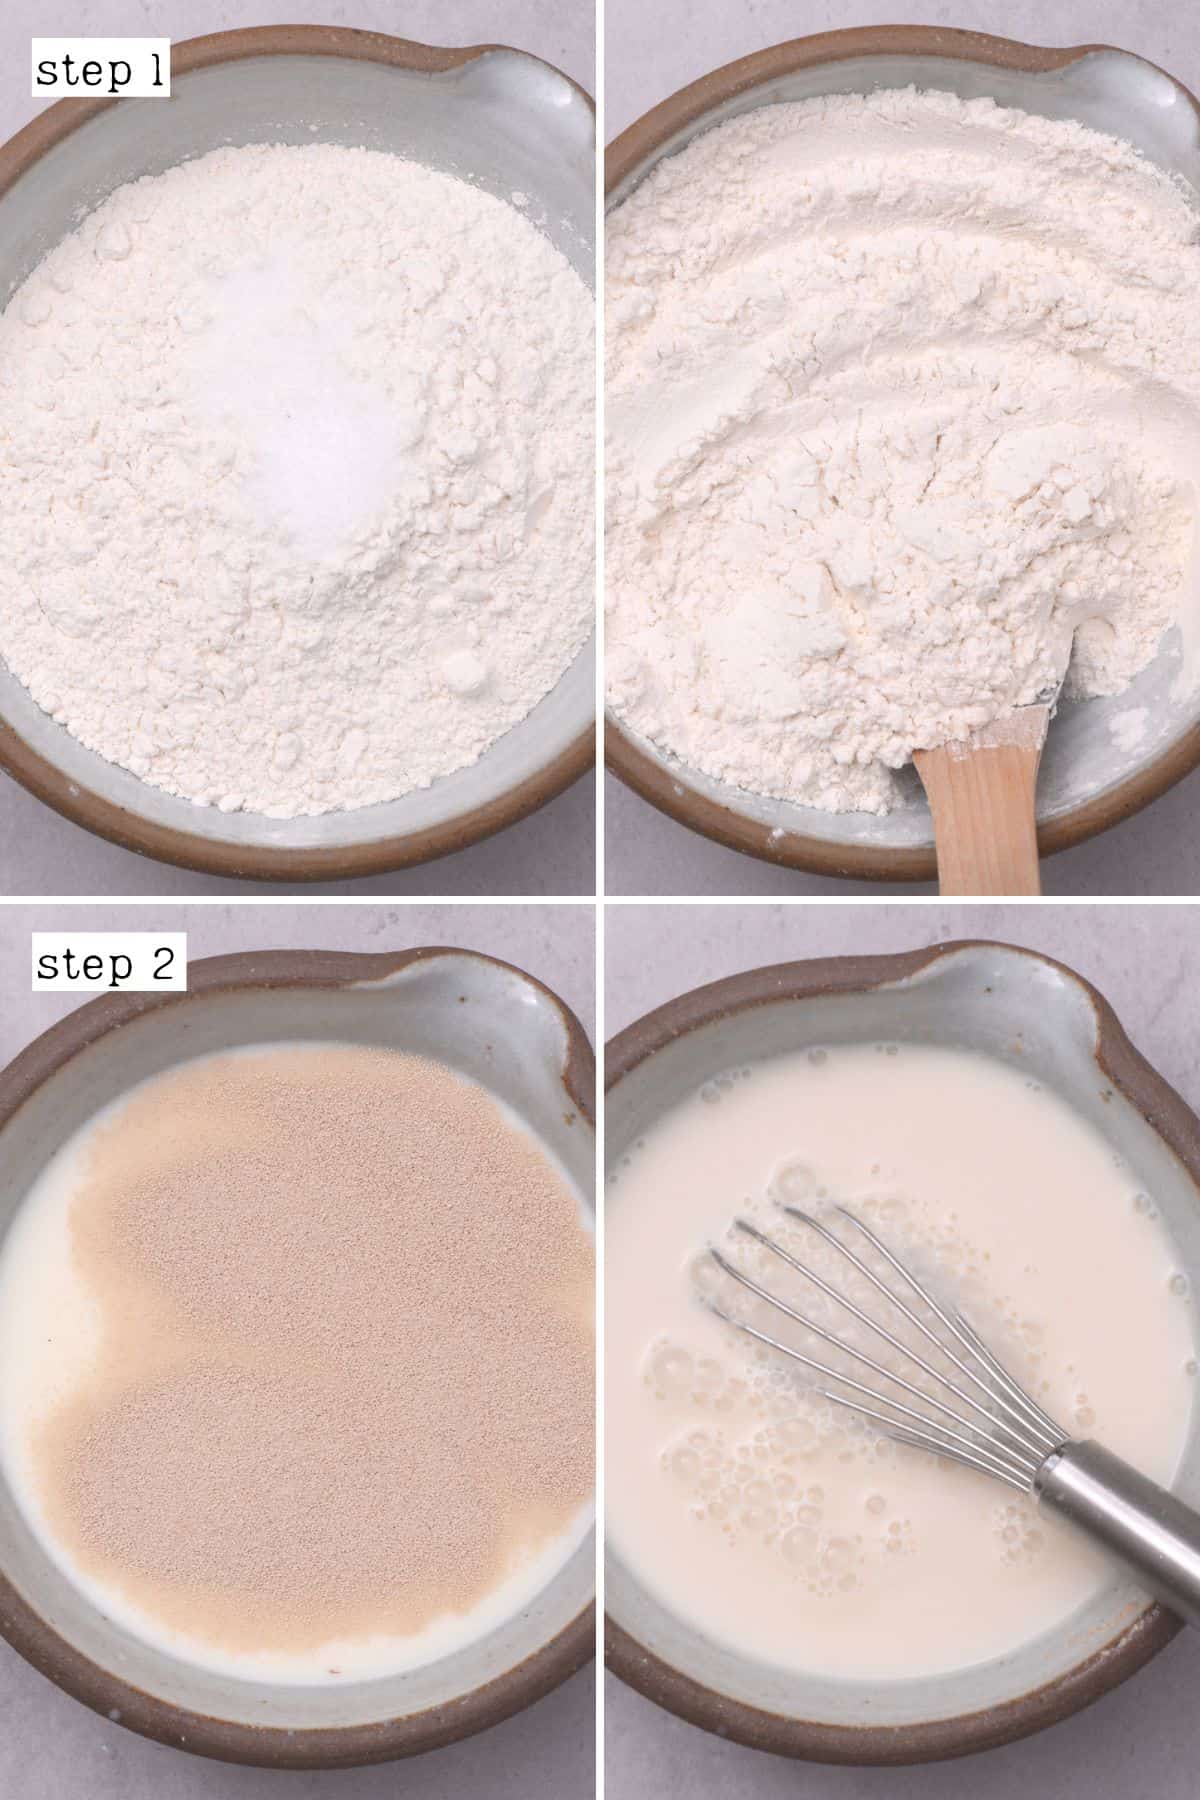 Steps for preparing flour and yeast mixture